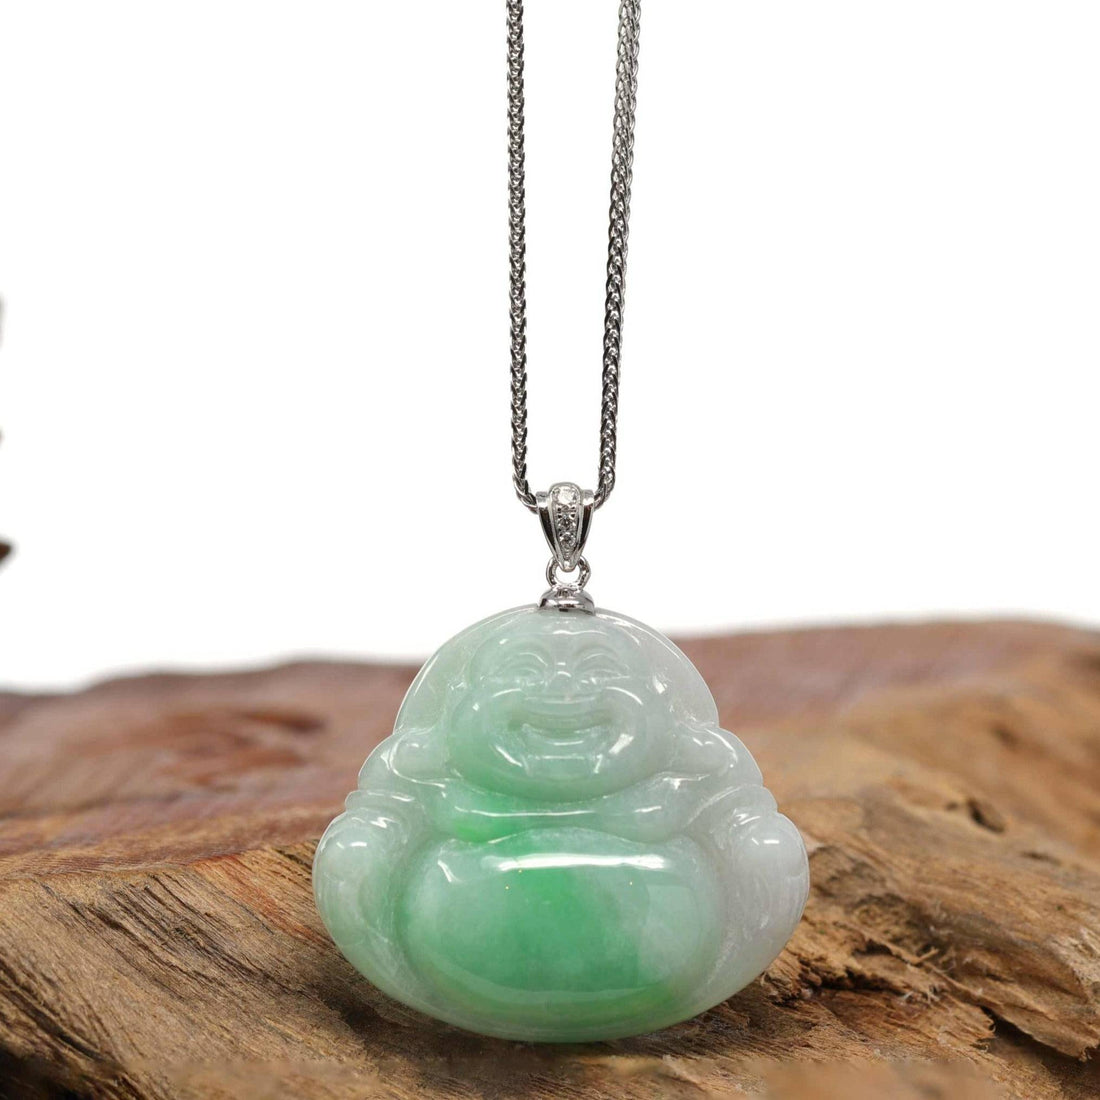 Jade Smiling Laughing Iced Green Buddha Good Fortune Rope Chain Necklace  Gold | eBay